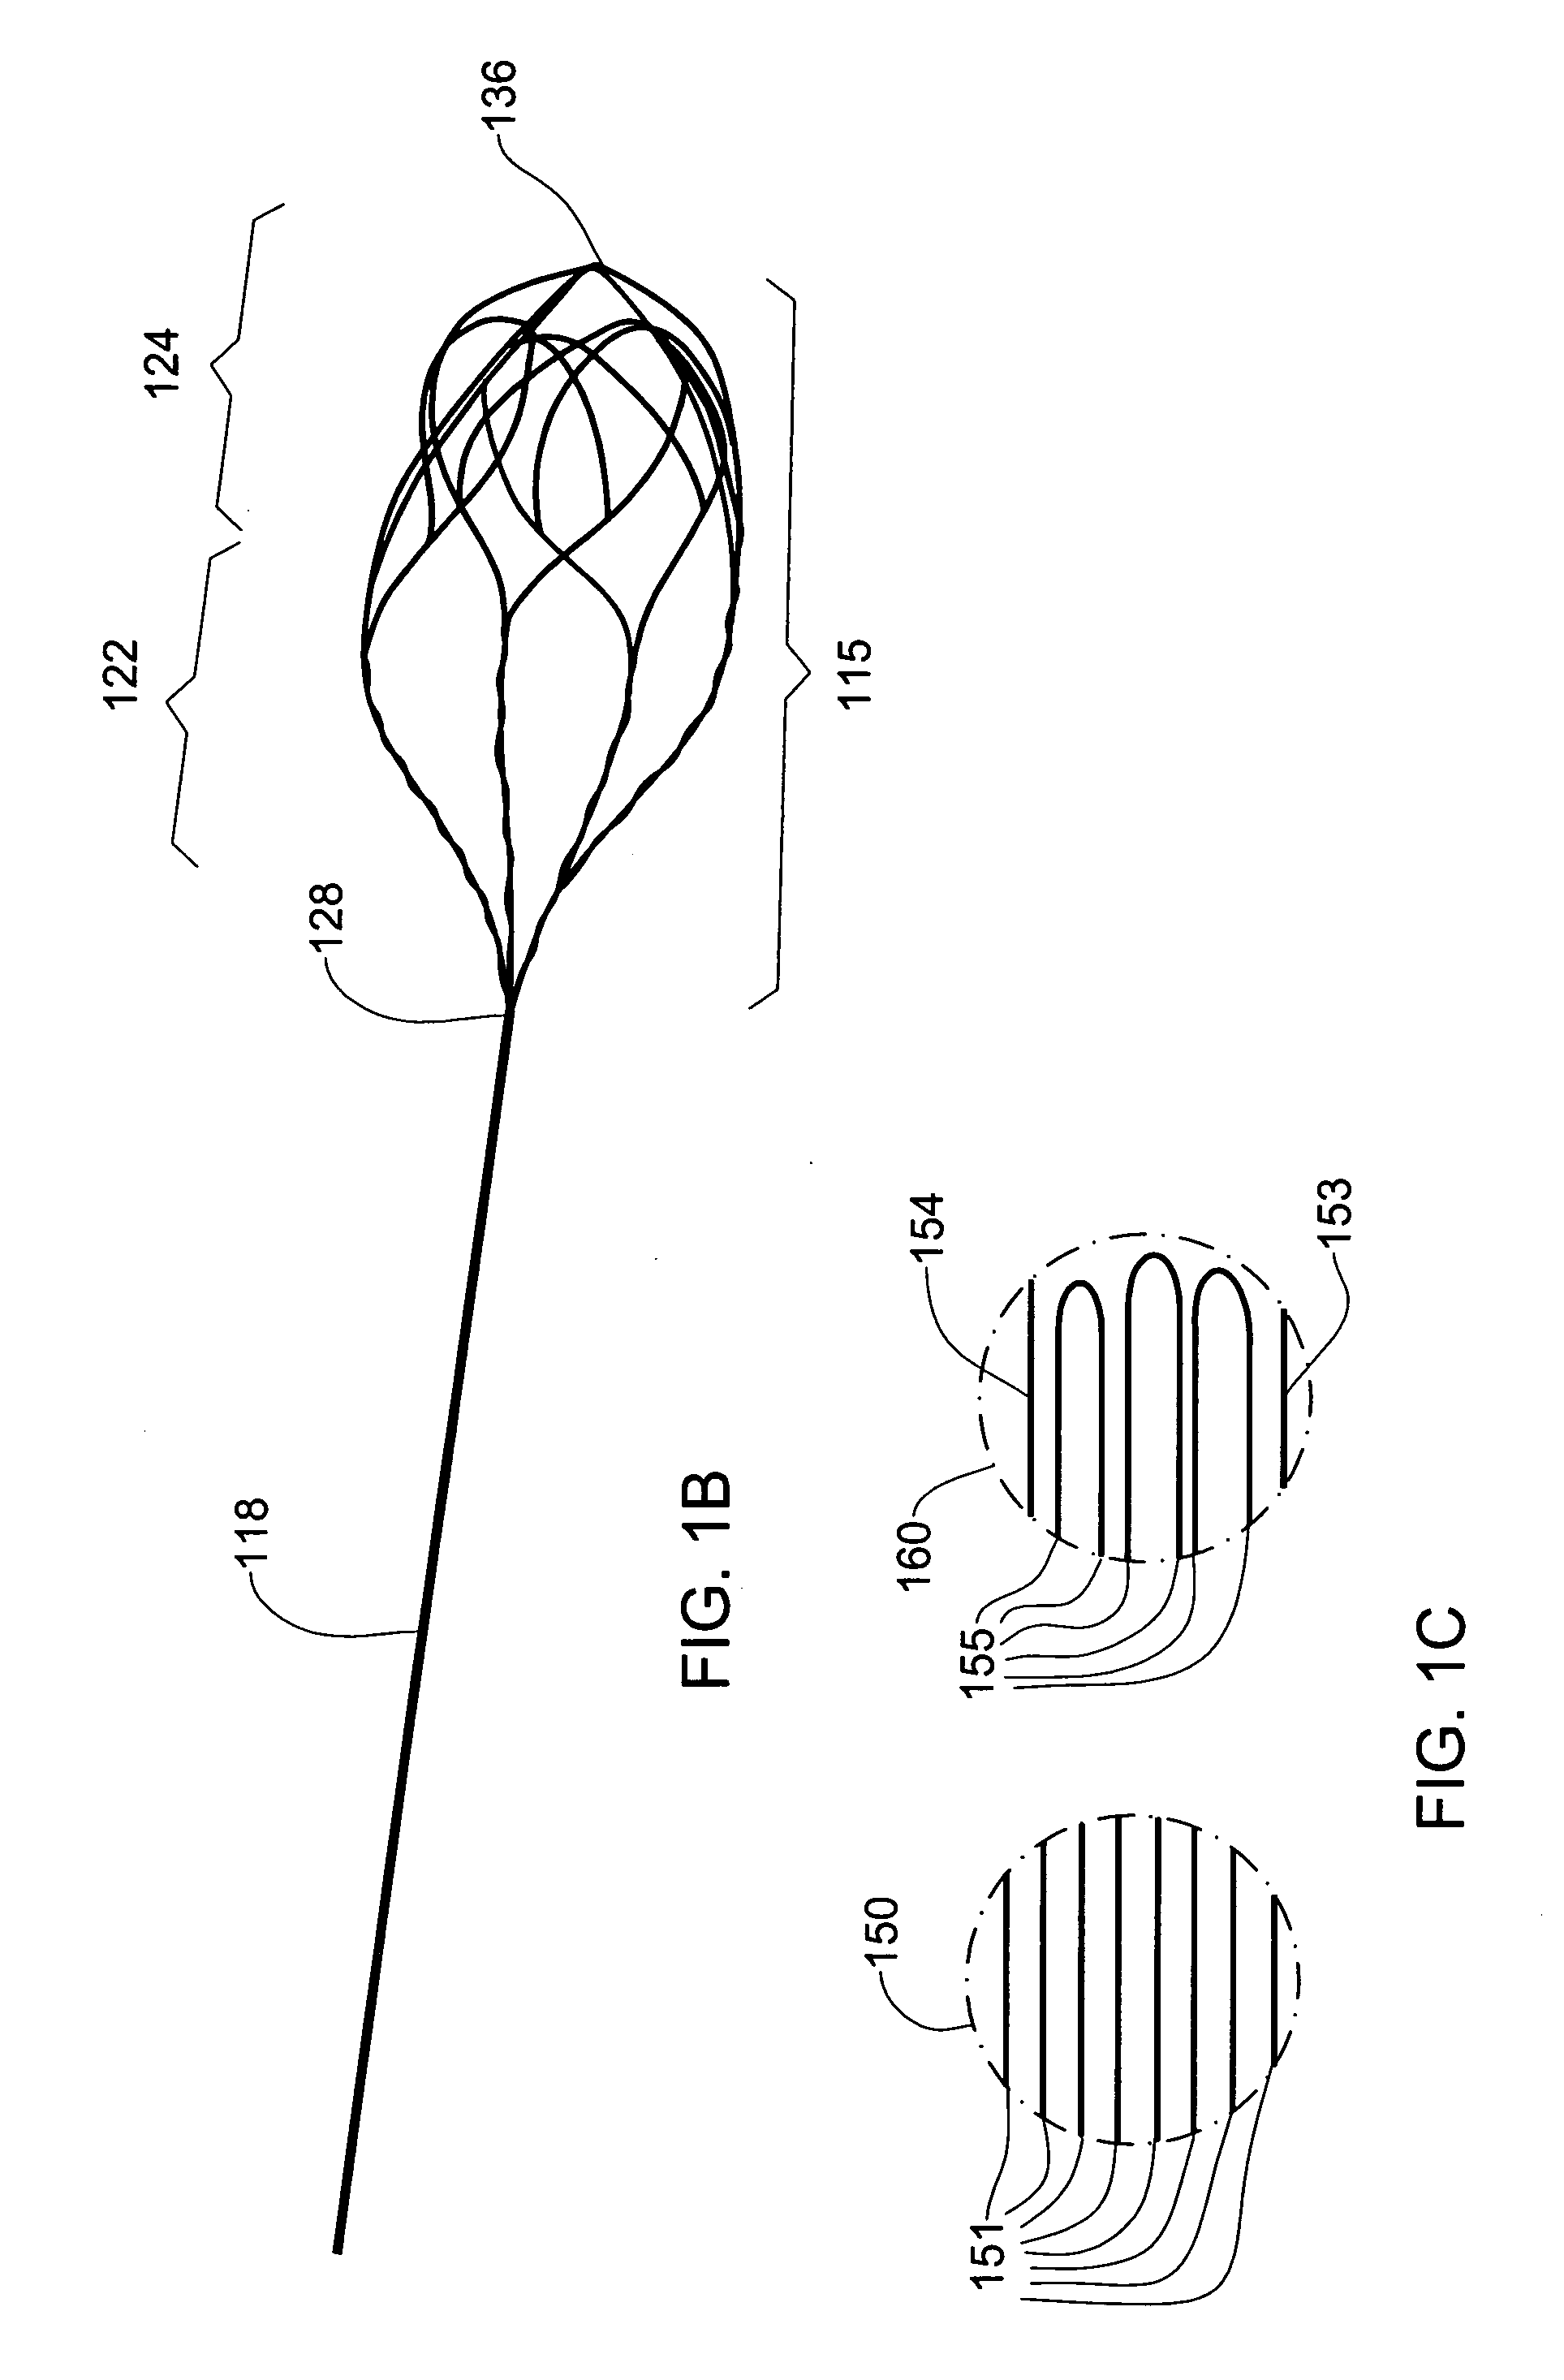 Surgical device for retrieval of foreign objects from a body